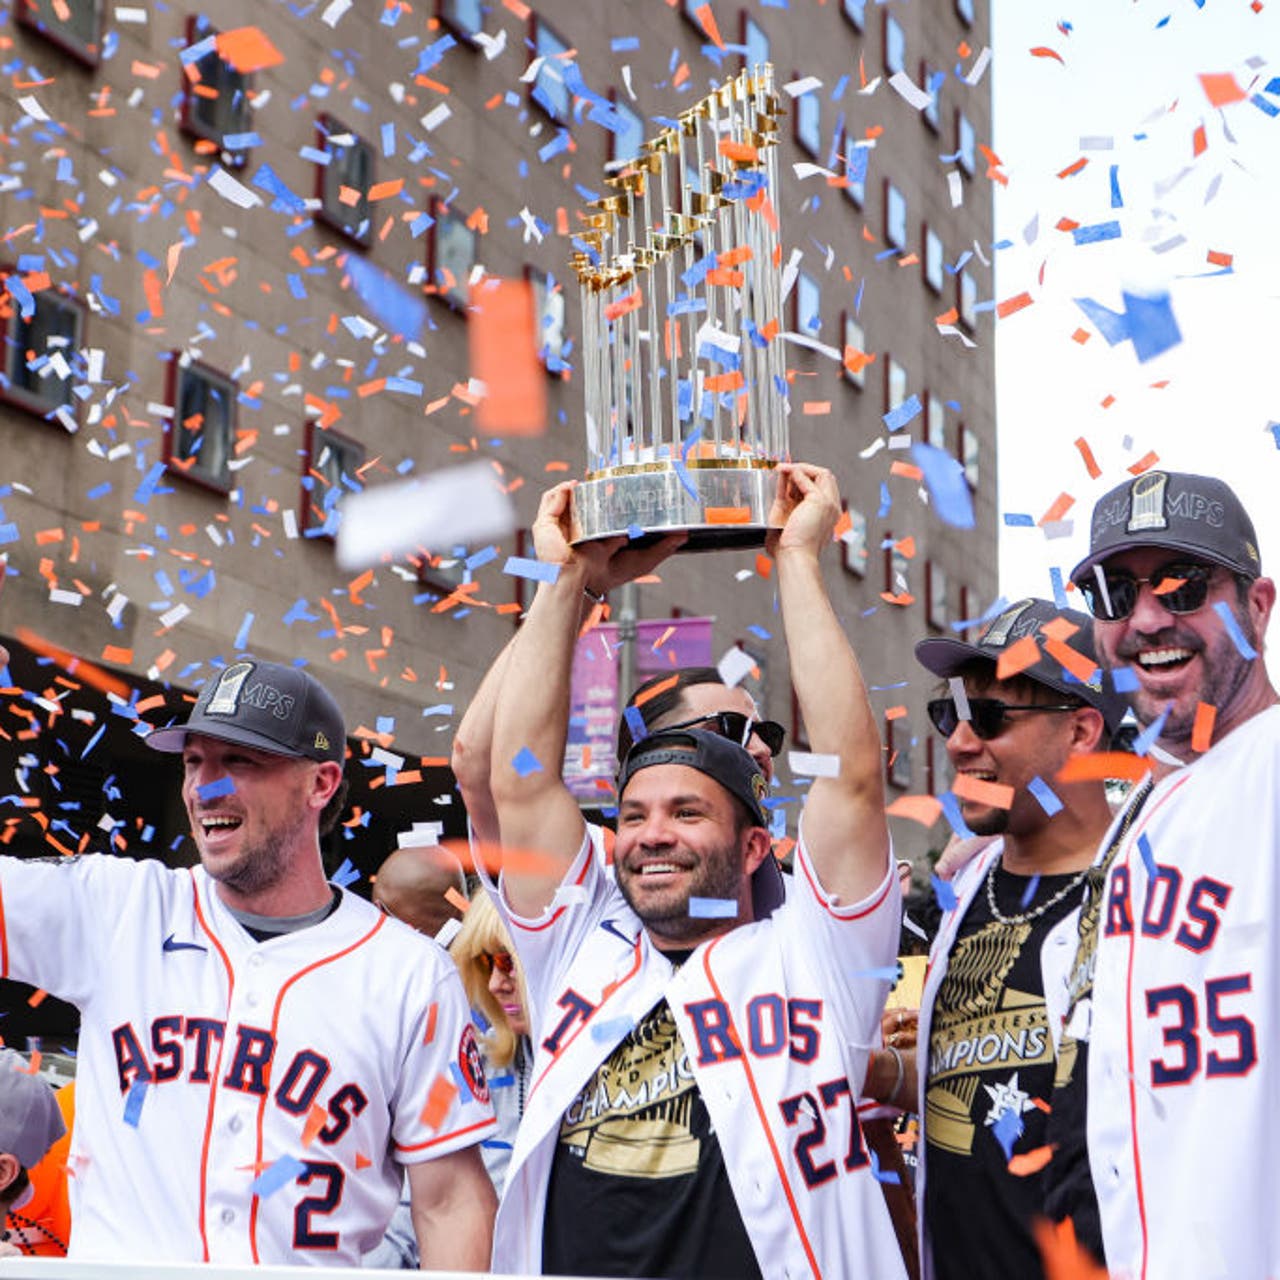 Fans celebrate Houston Astros' World Series win with parade, SiouxlandProud, Sioux City, IA